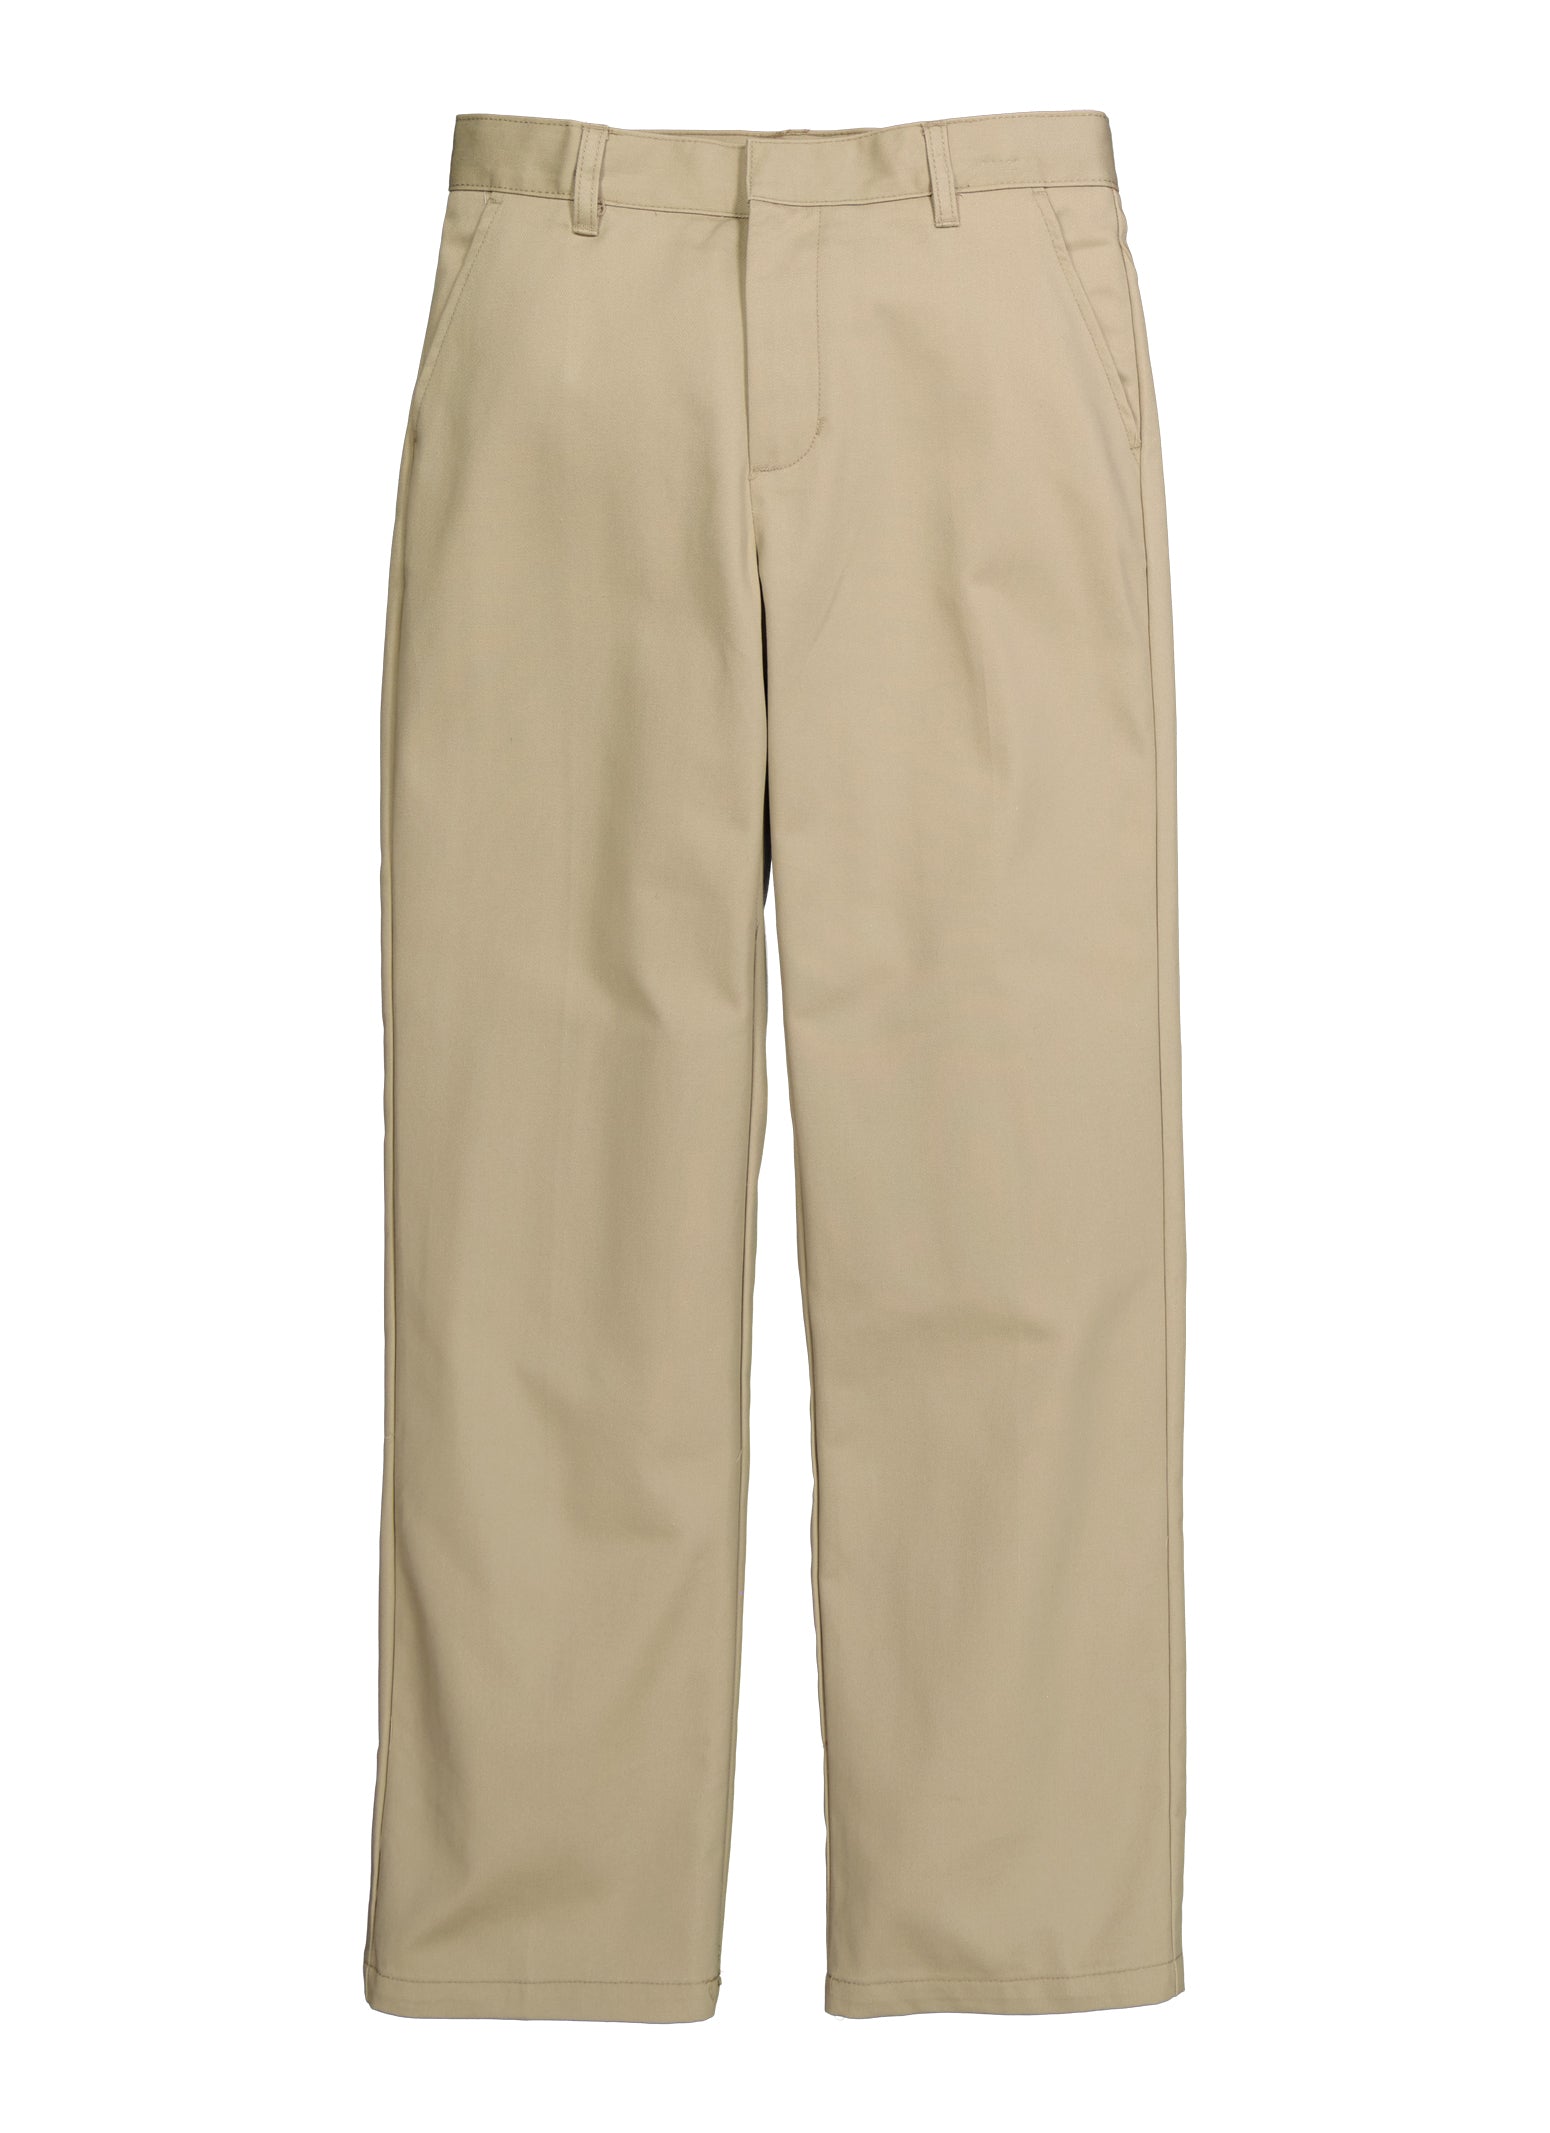 French Toast Boys 8-16 Relaxed Fit Twill Pants, Khaki, Size 14